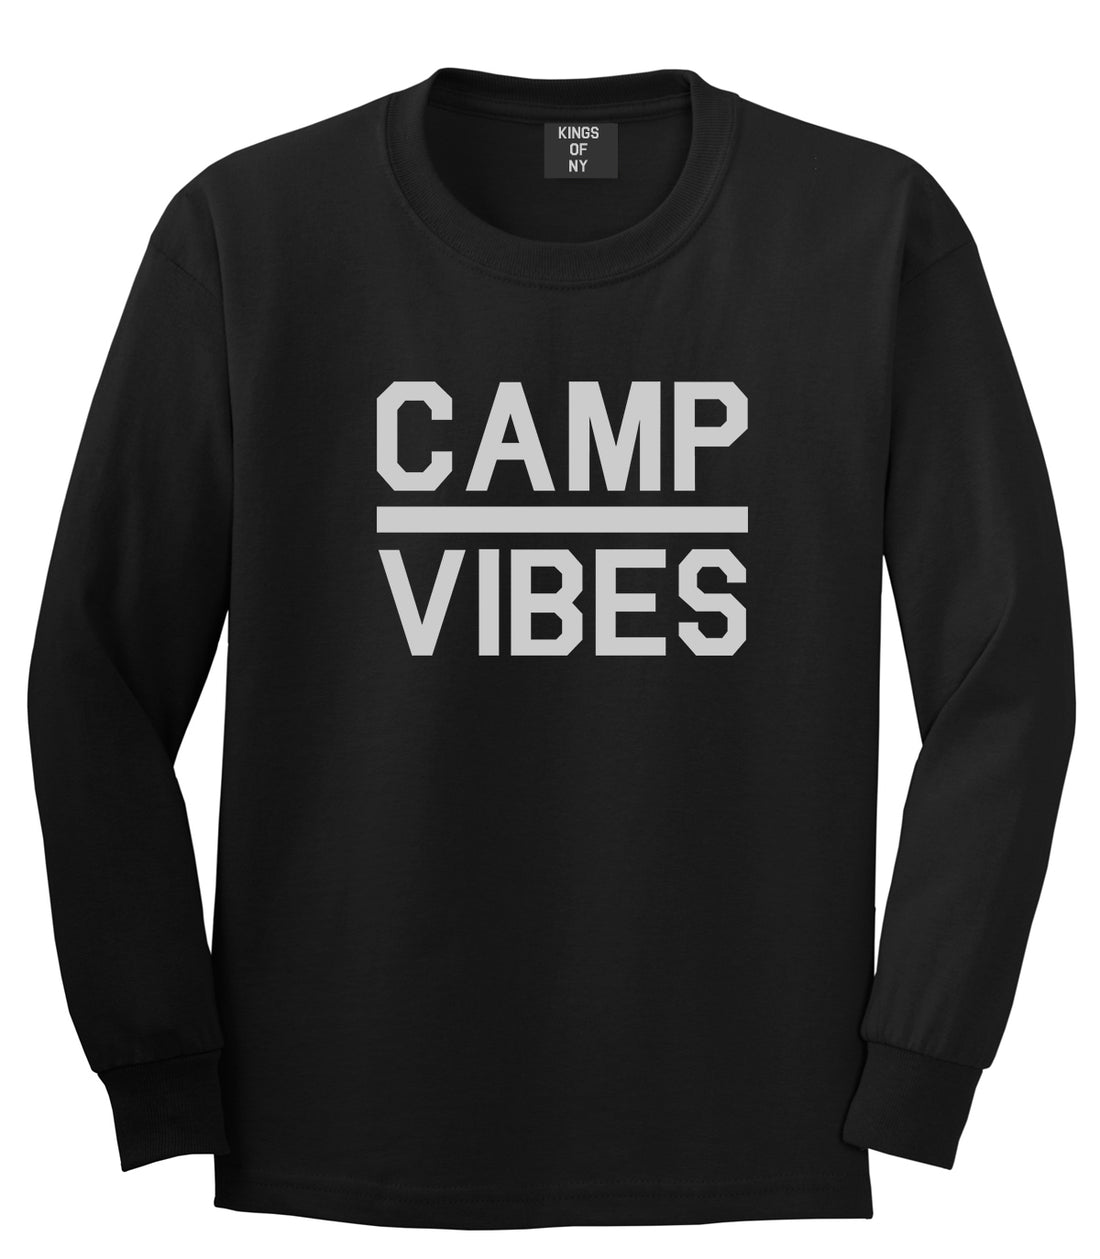 Camp Vibes Black Long Sleeve T-Shirt by Kings Of NY